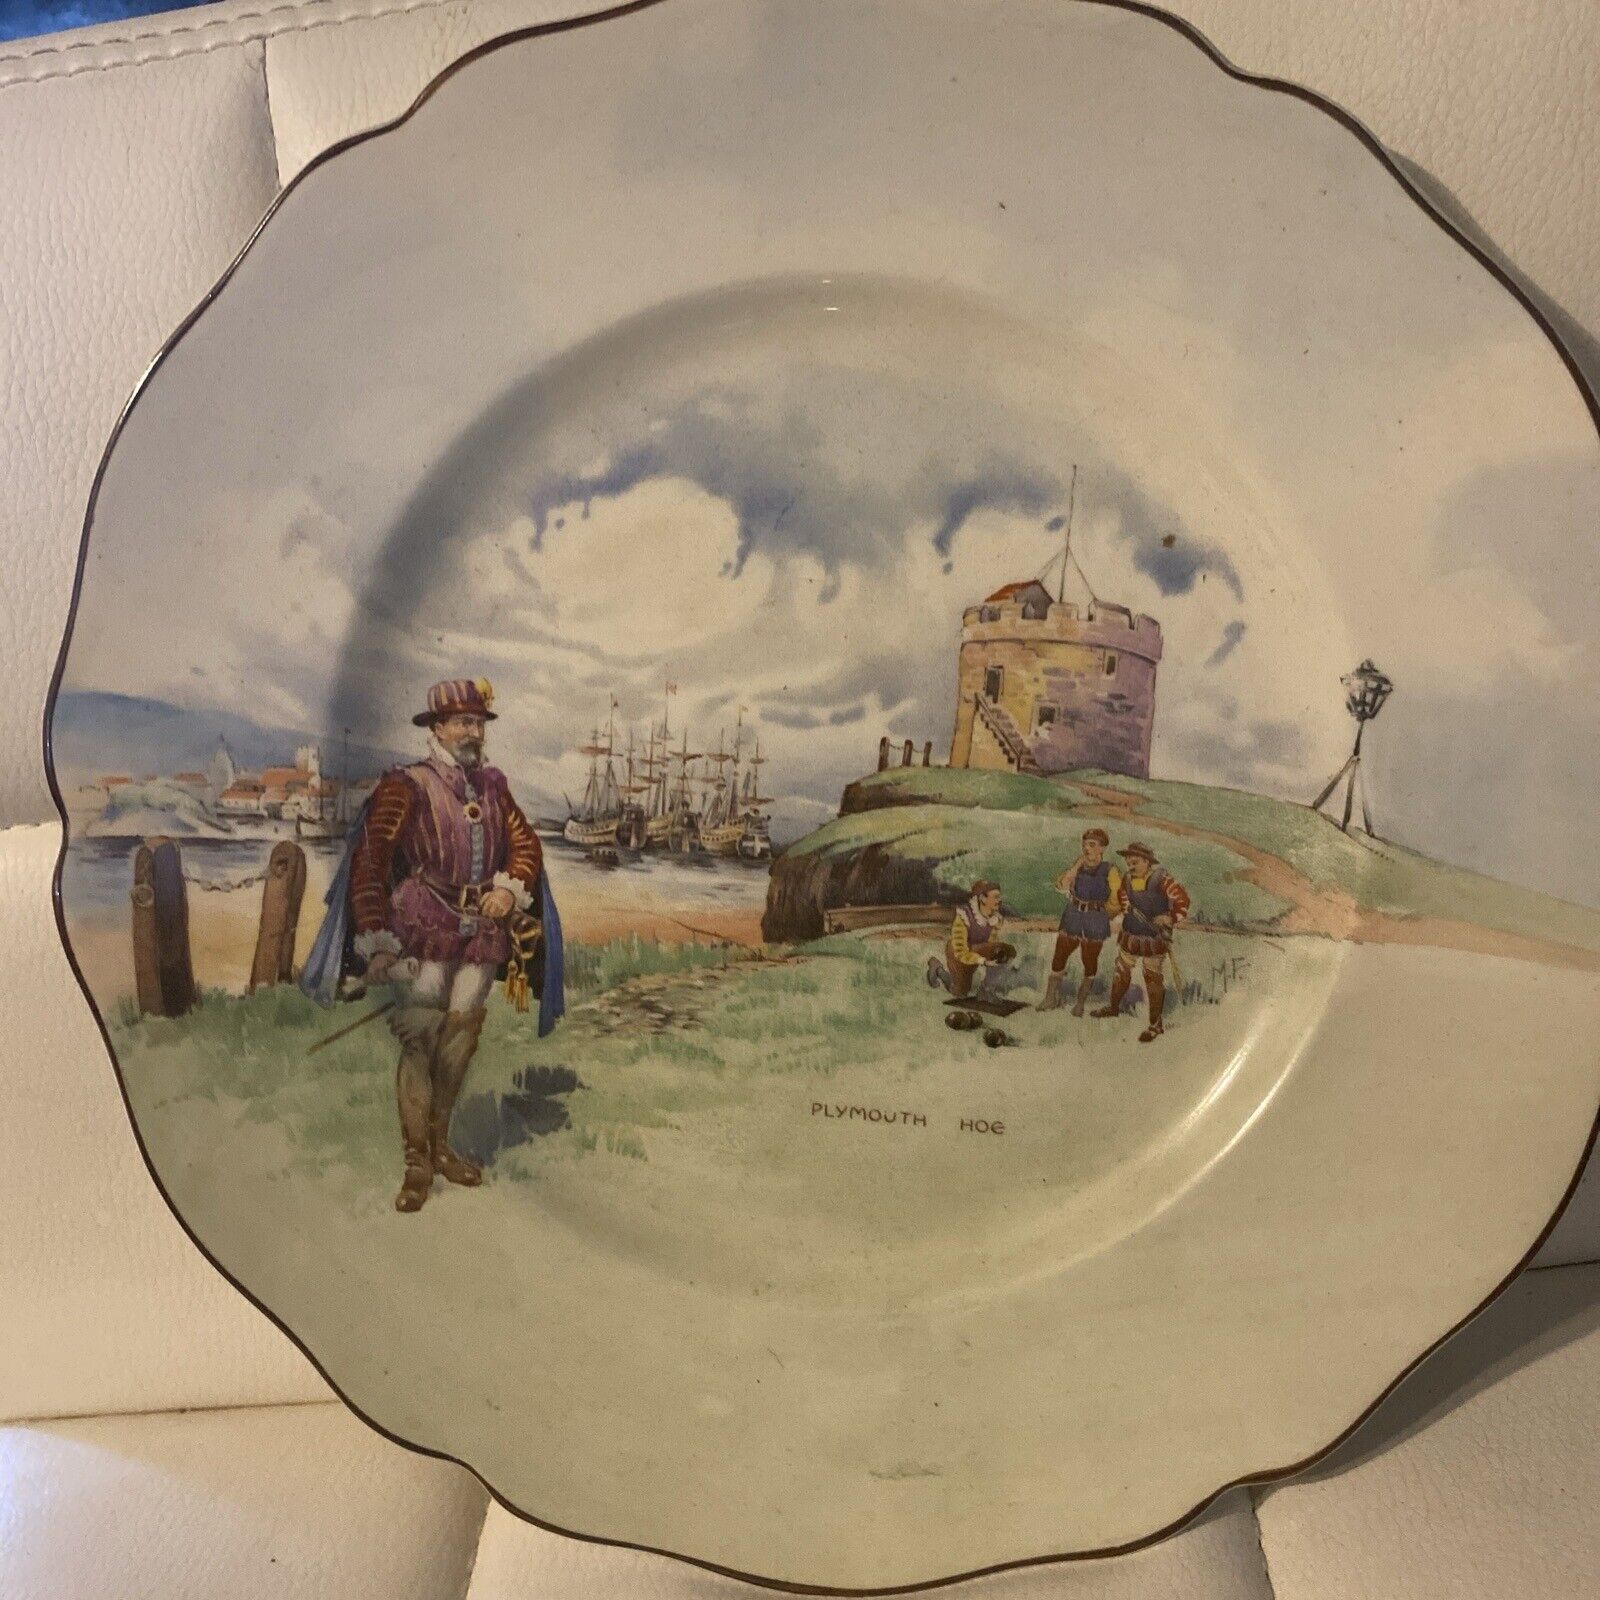 Antique Royal Doulton Collector / Display Plate Plymouth Hoe